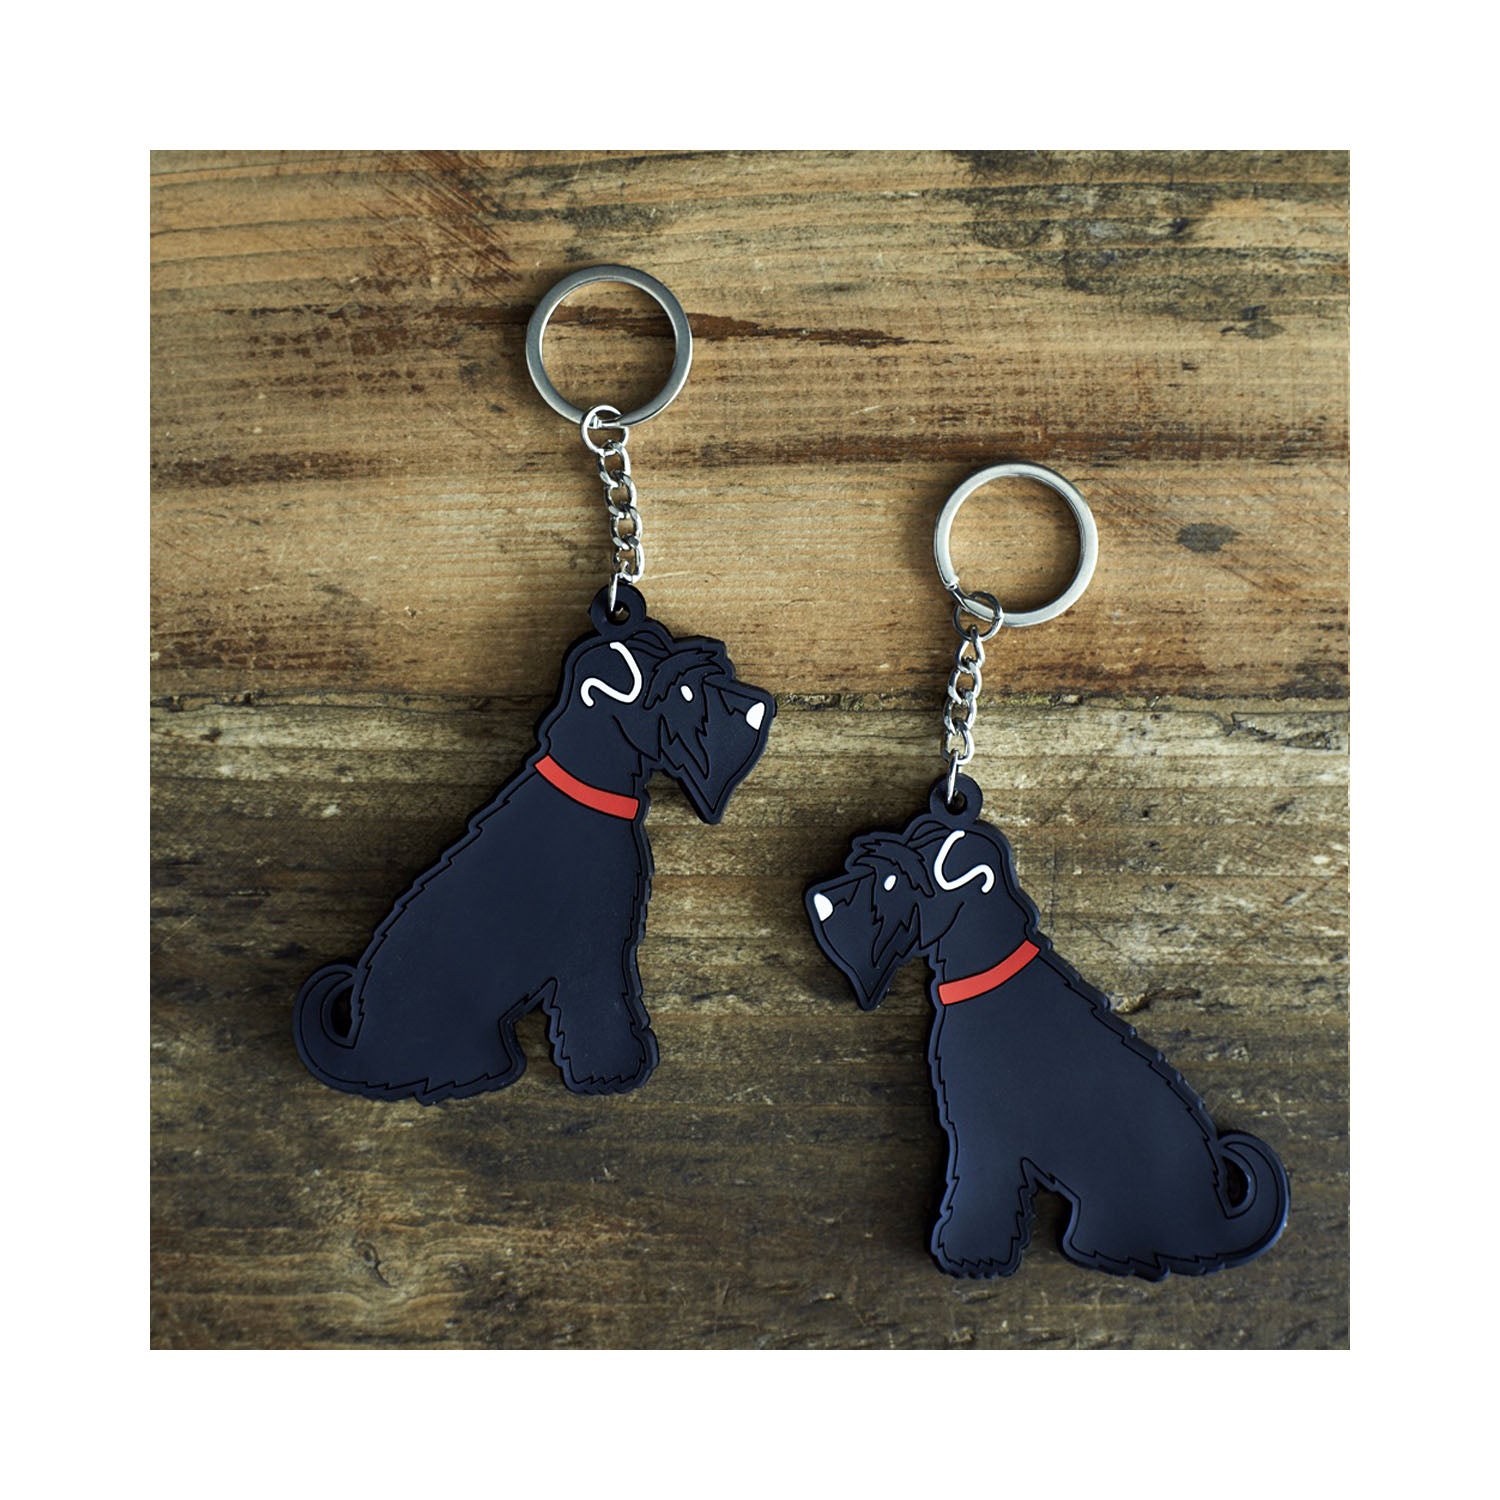 Dog Lover Gifts available at Dog Krazy Gifts - Ernie The Black Schnauzer Keyring - part of the Sweet William range of gifts for dog lovers available from Dog Krazy Gifts